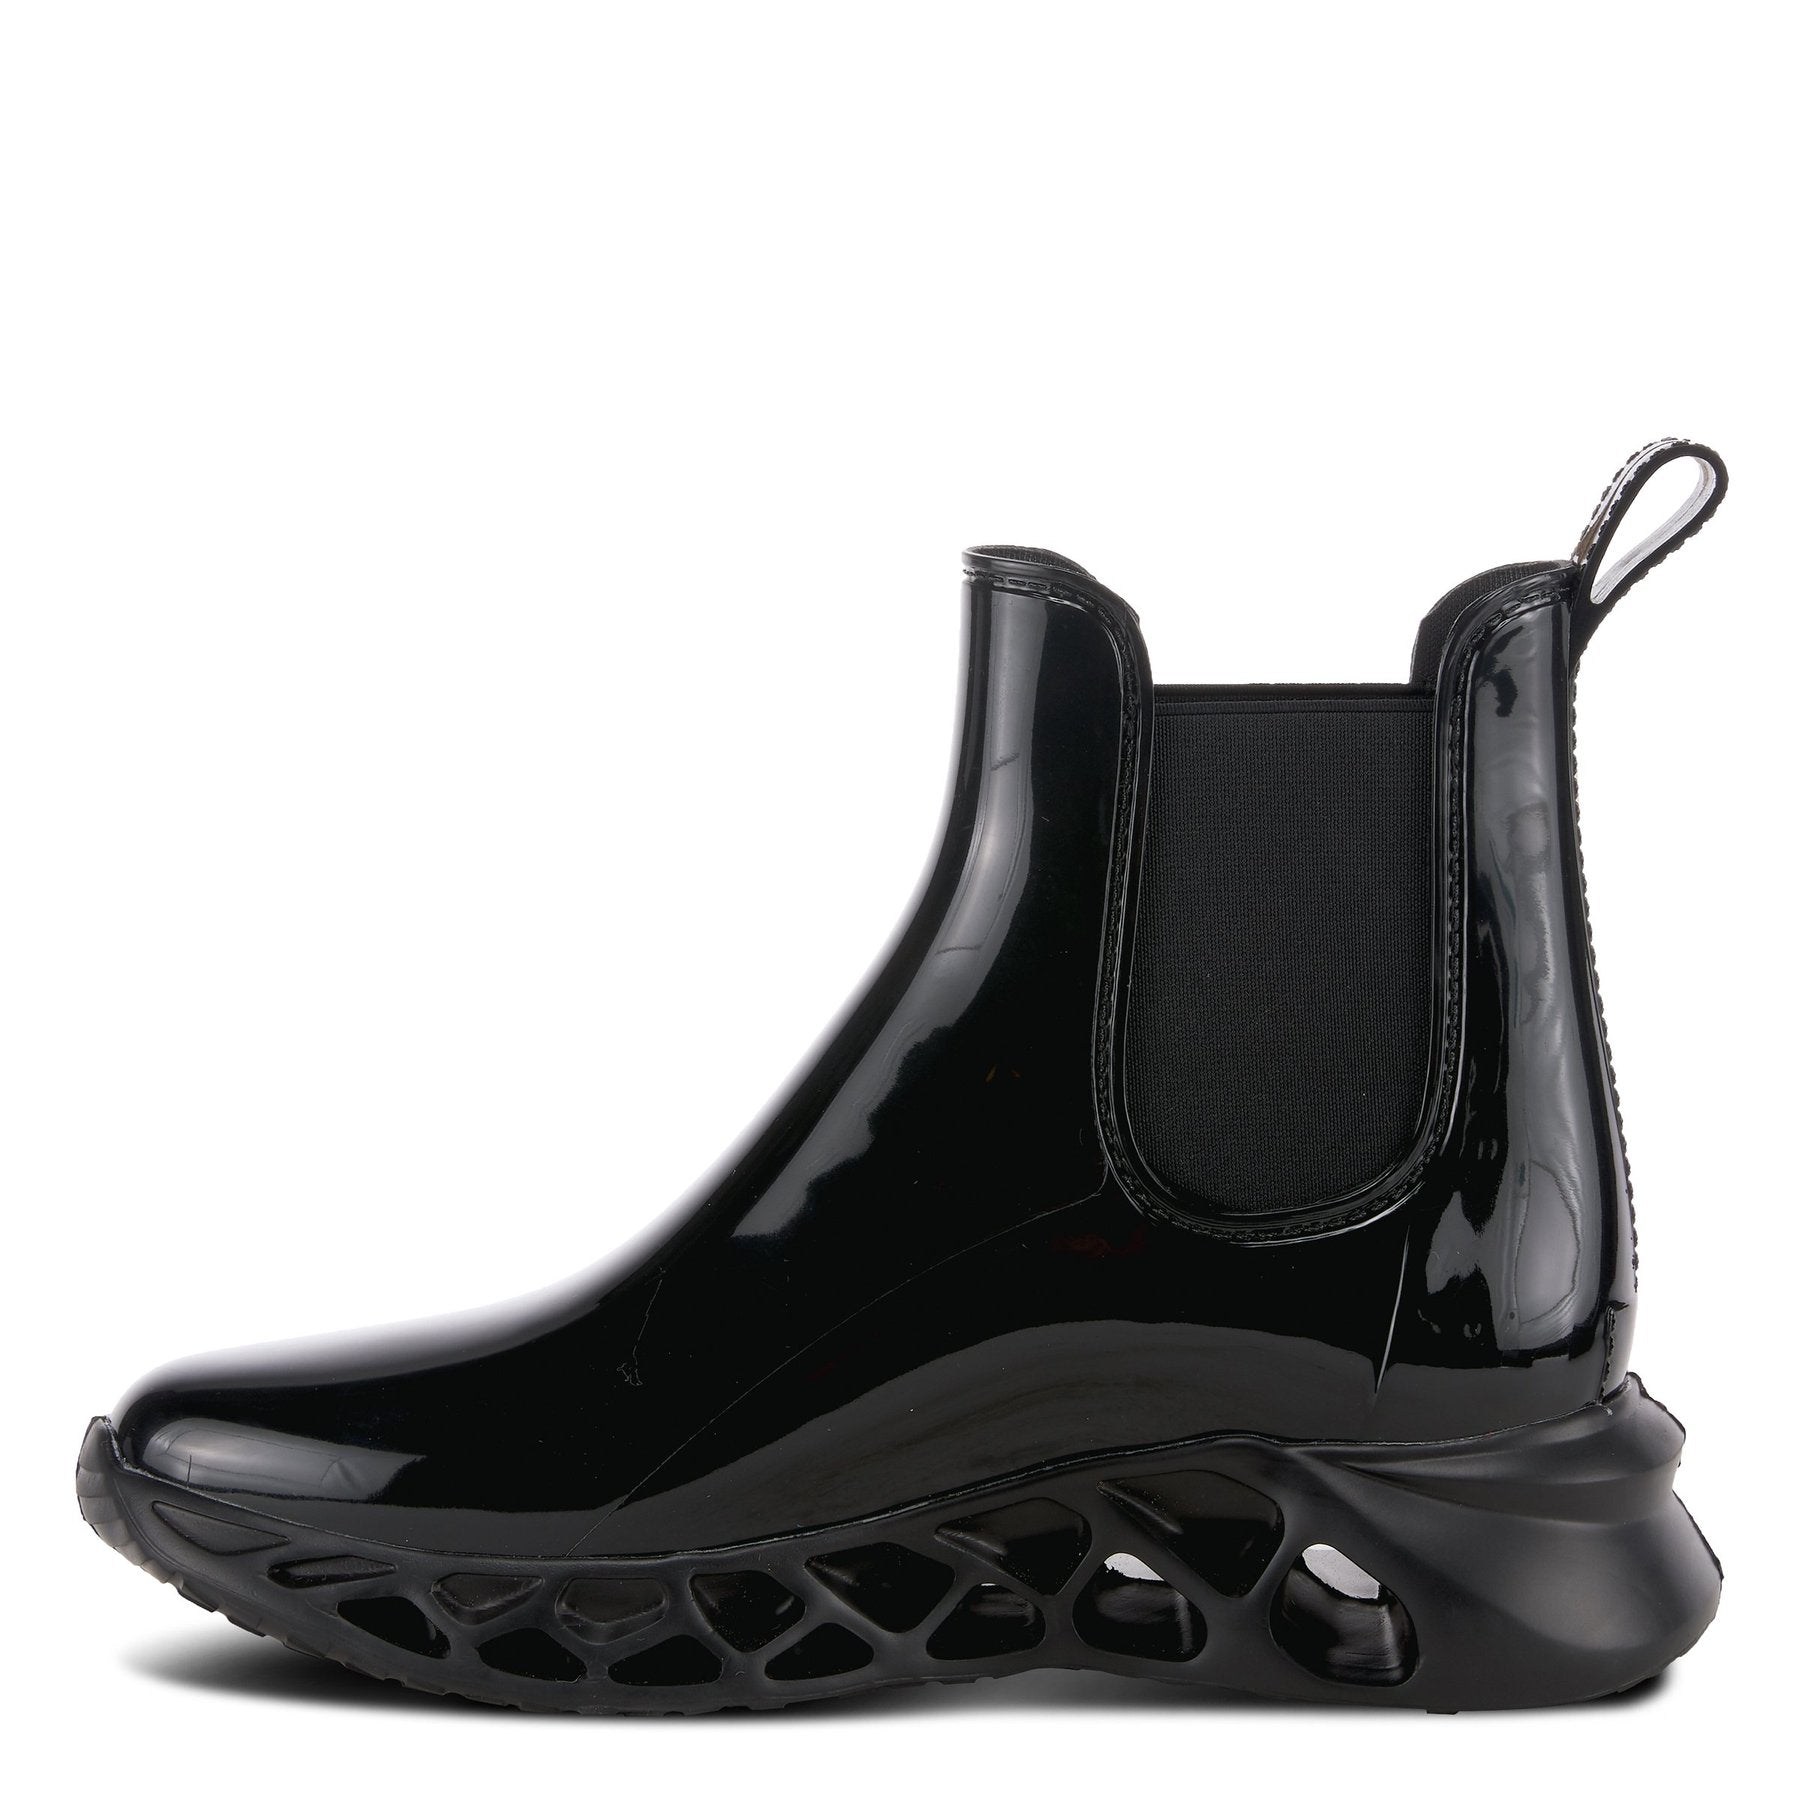 Inner side view of the yasmine boot. This black boot is rubber with elastic side gores and rubber soles with holes.